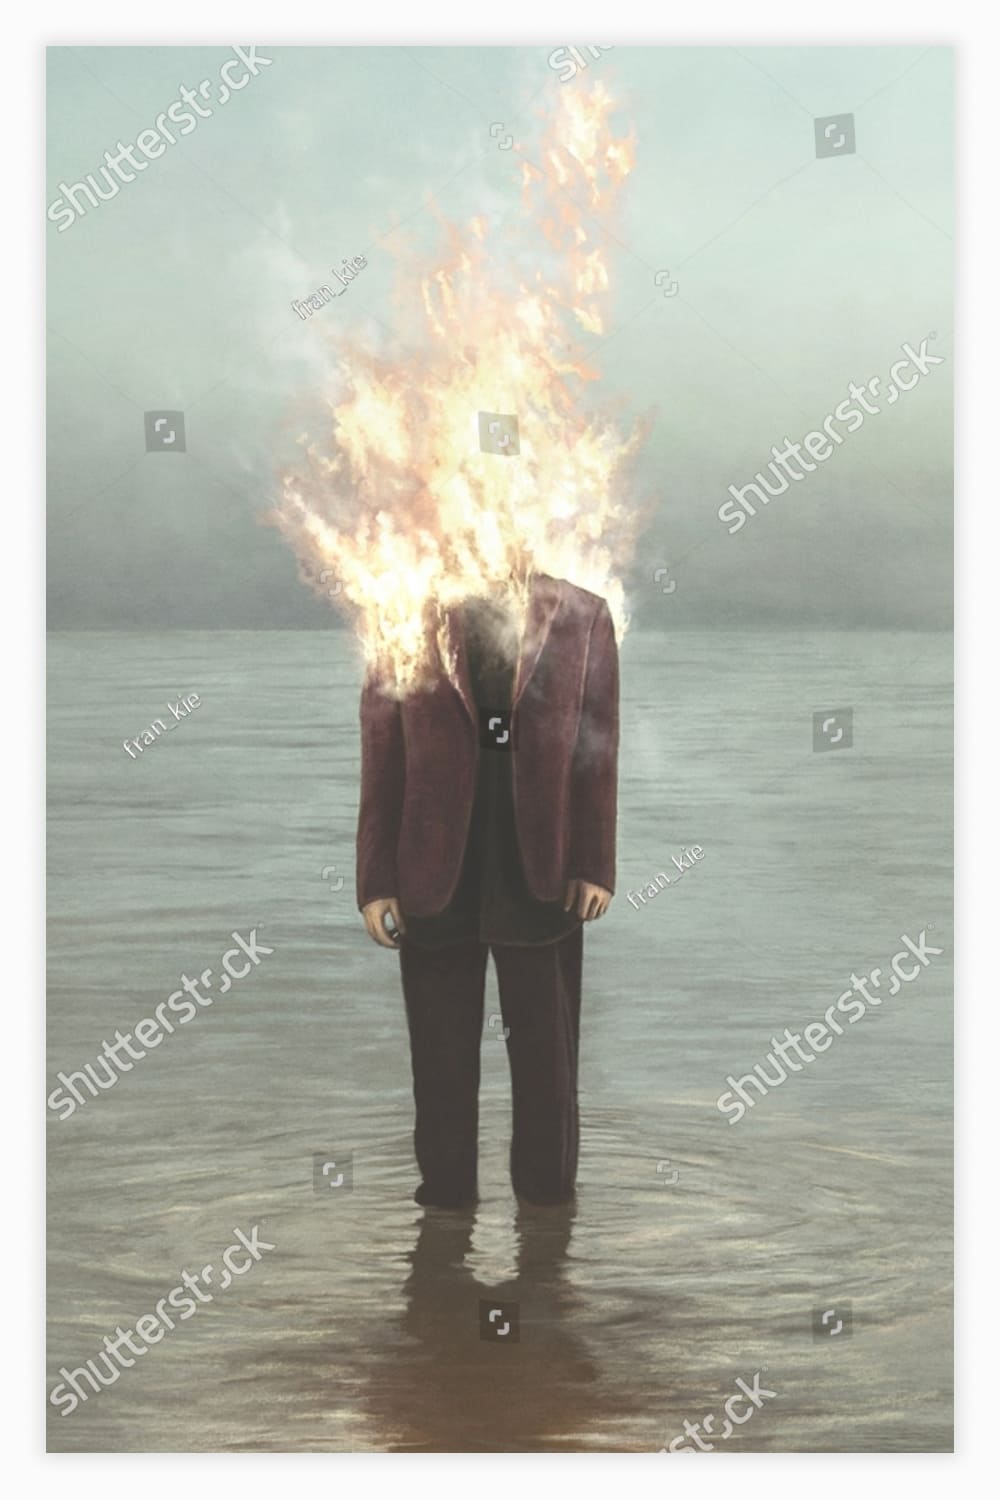 Illustration of man burning in the water, surreal contrast abstract concept.